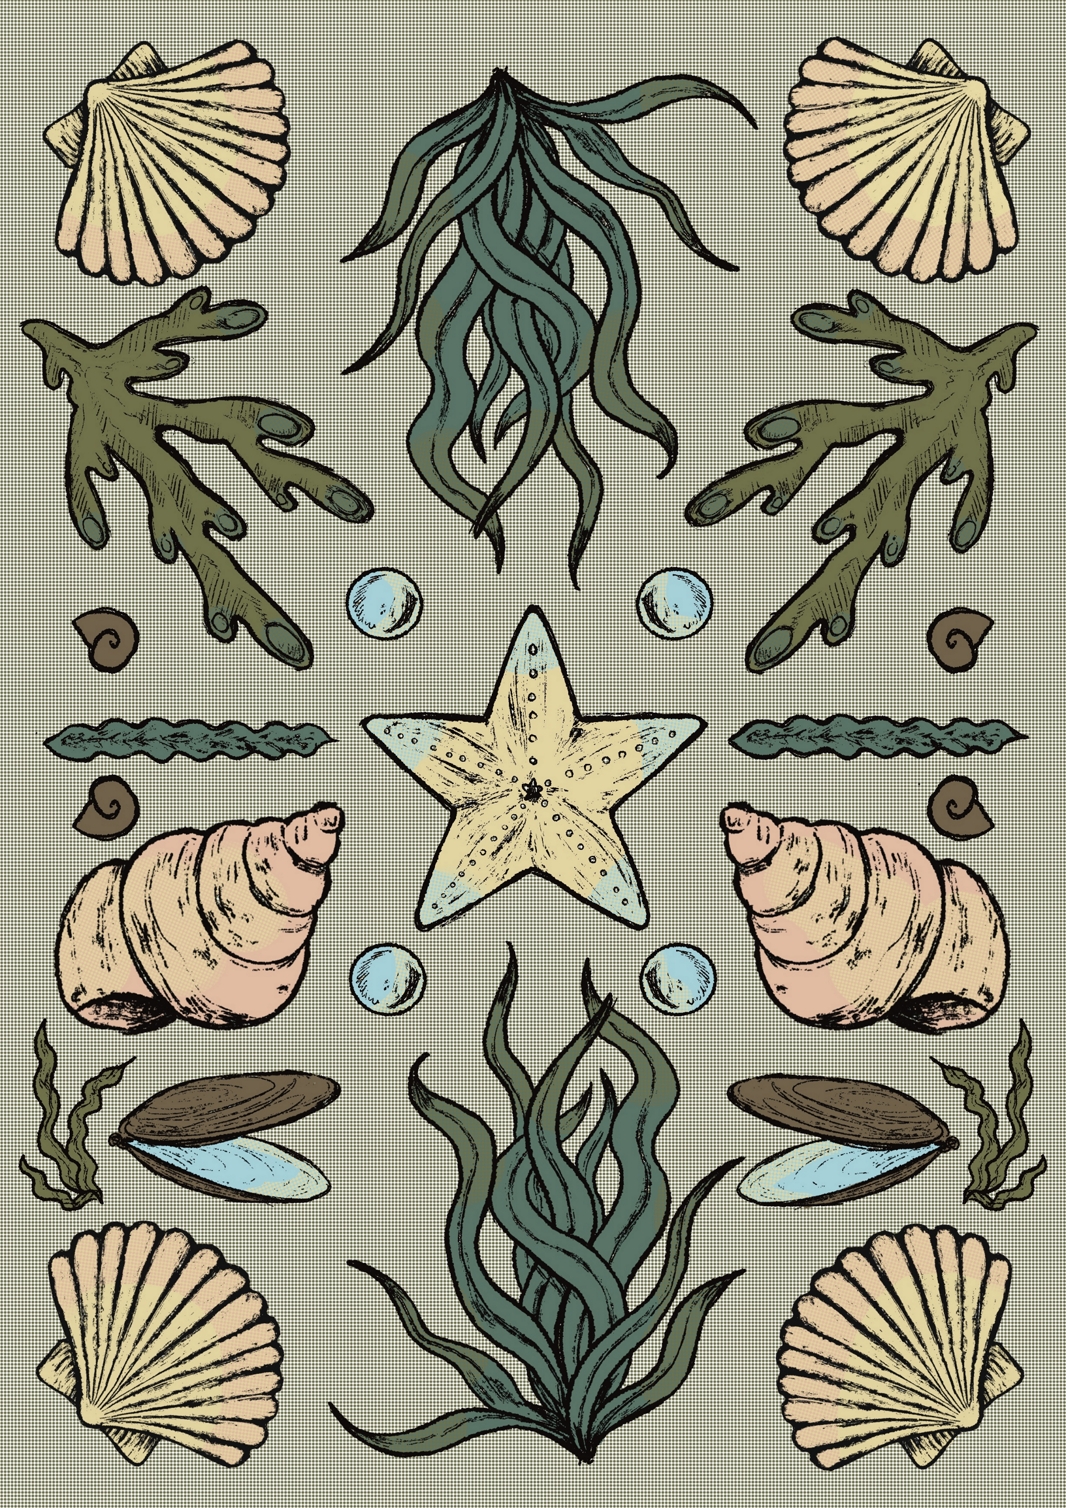 BA artwork by Joanna Asia Kazub. A symmetrical illustration of marine elements such as shells, seaweed and starfish. The colours are pastel and half-toned giving it a vintage feeling.